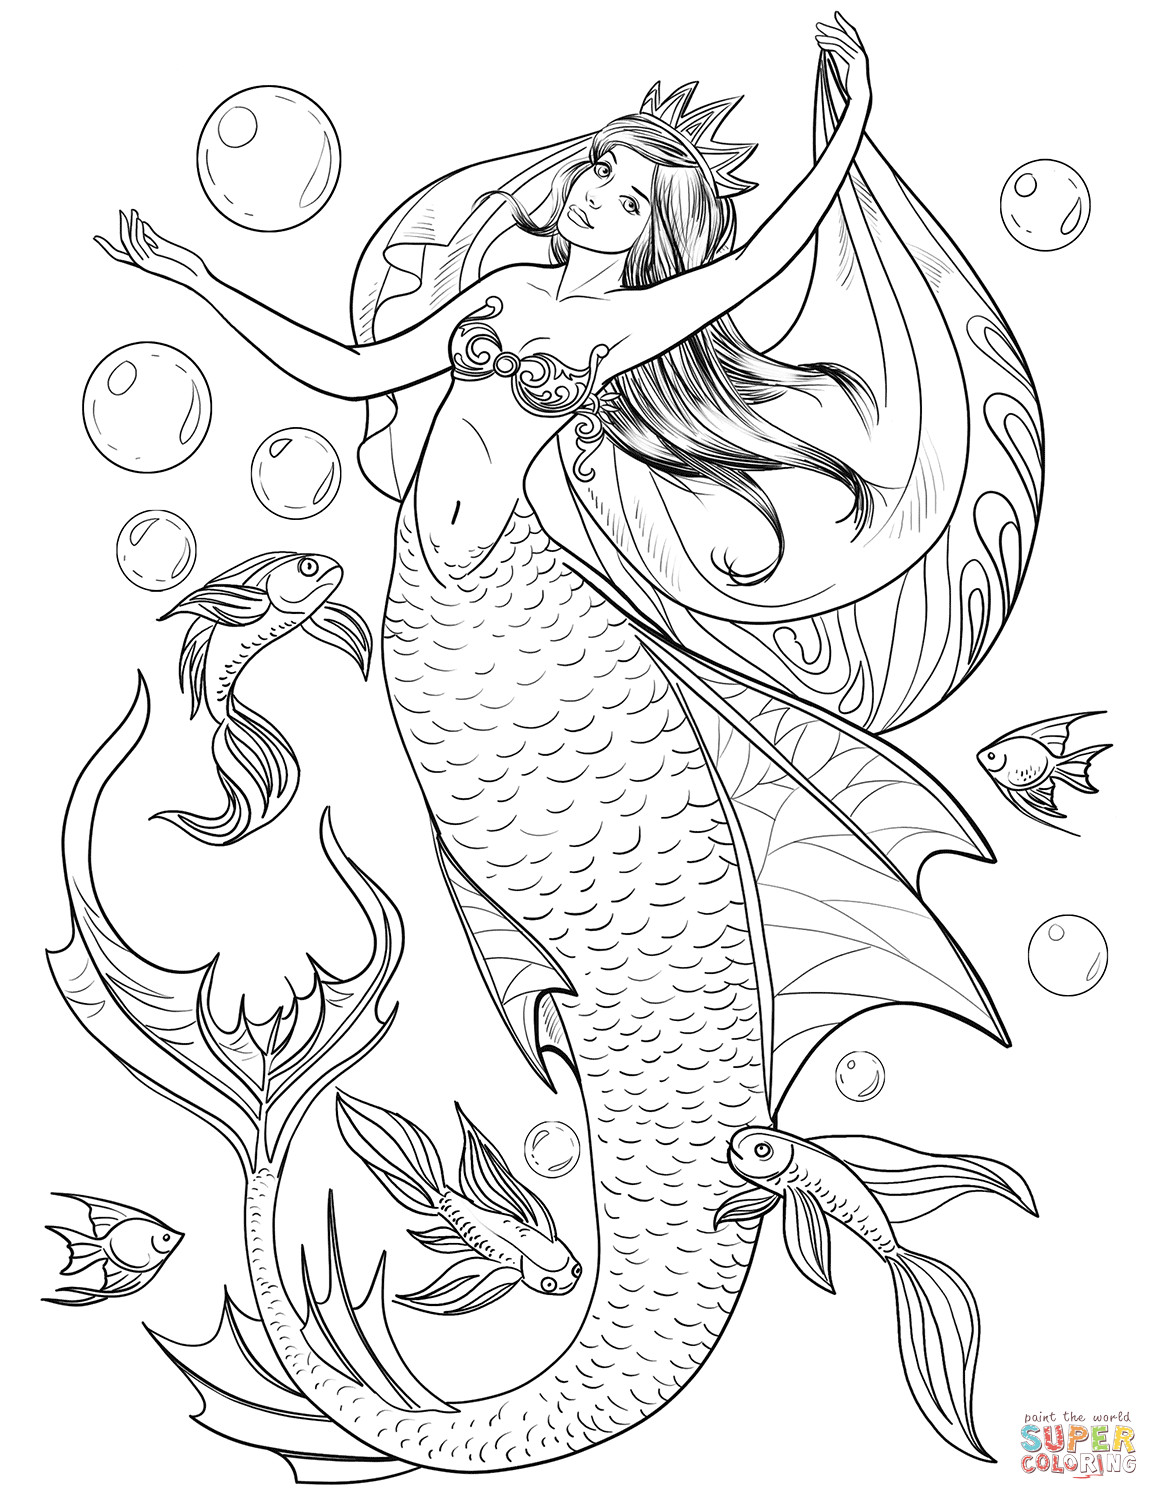 Coloring Pages For Toddlers Mermaid
 Mermaid coloring page